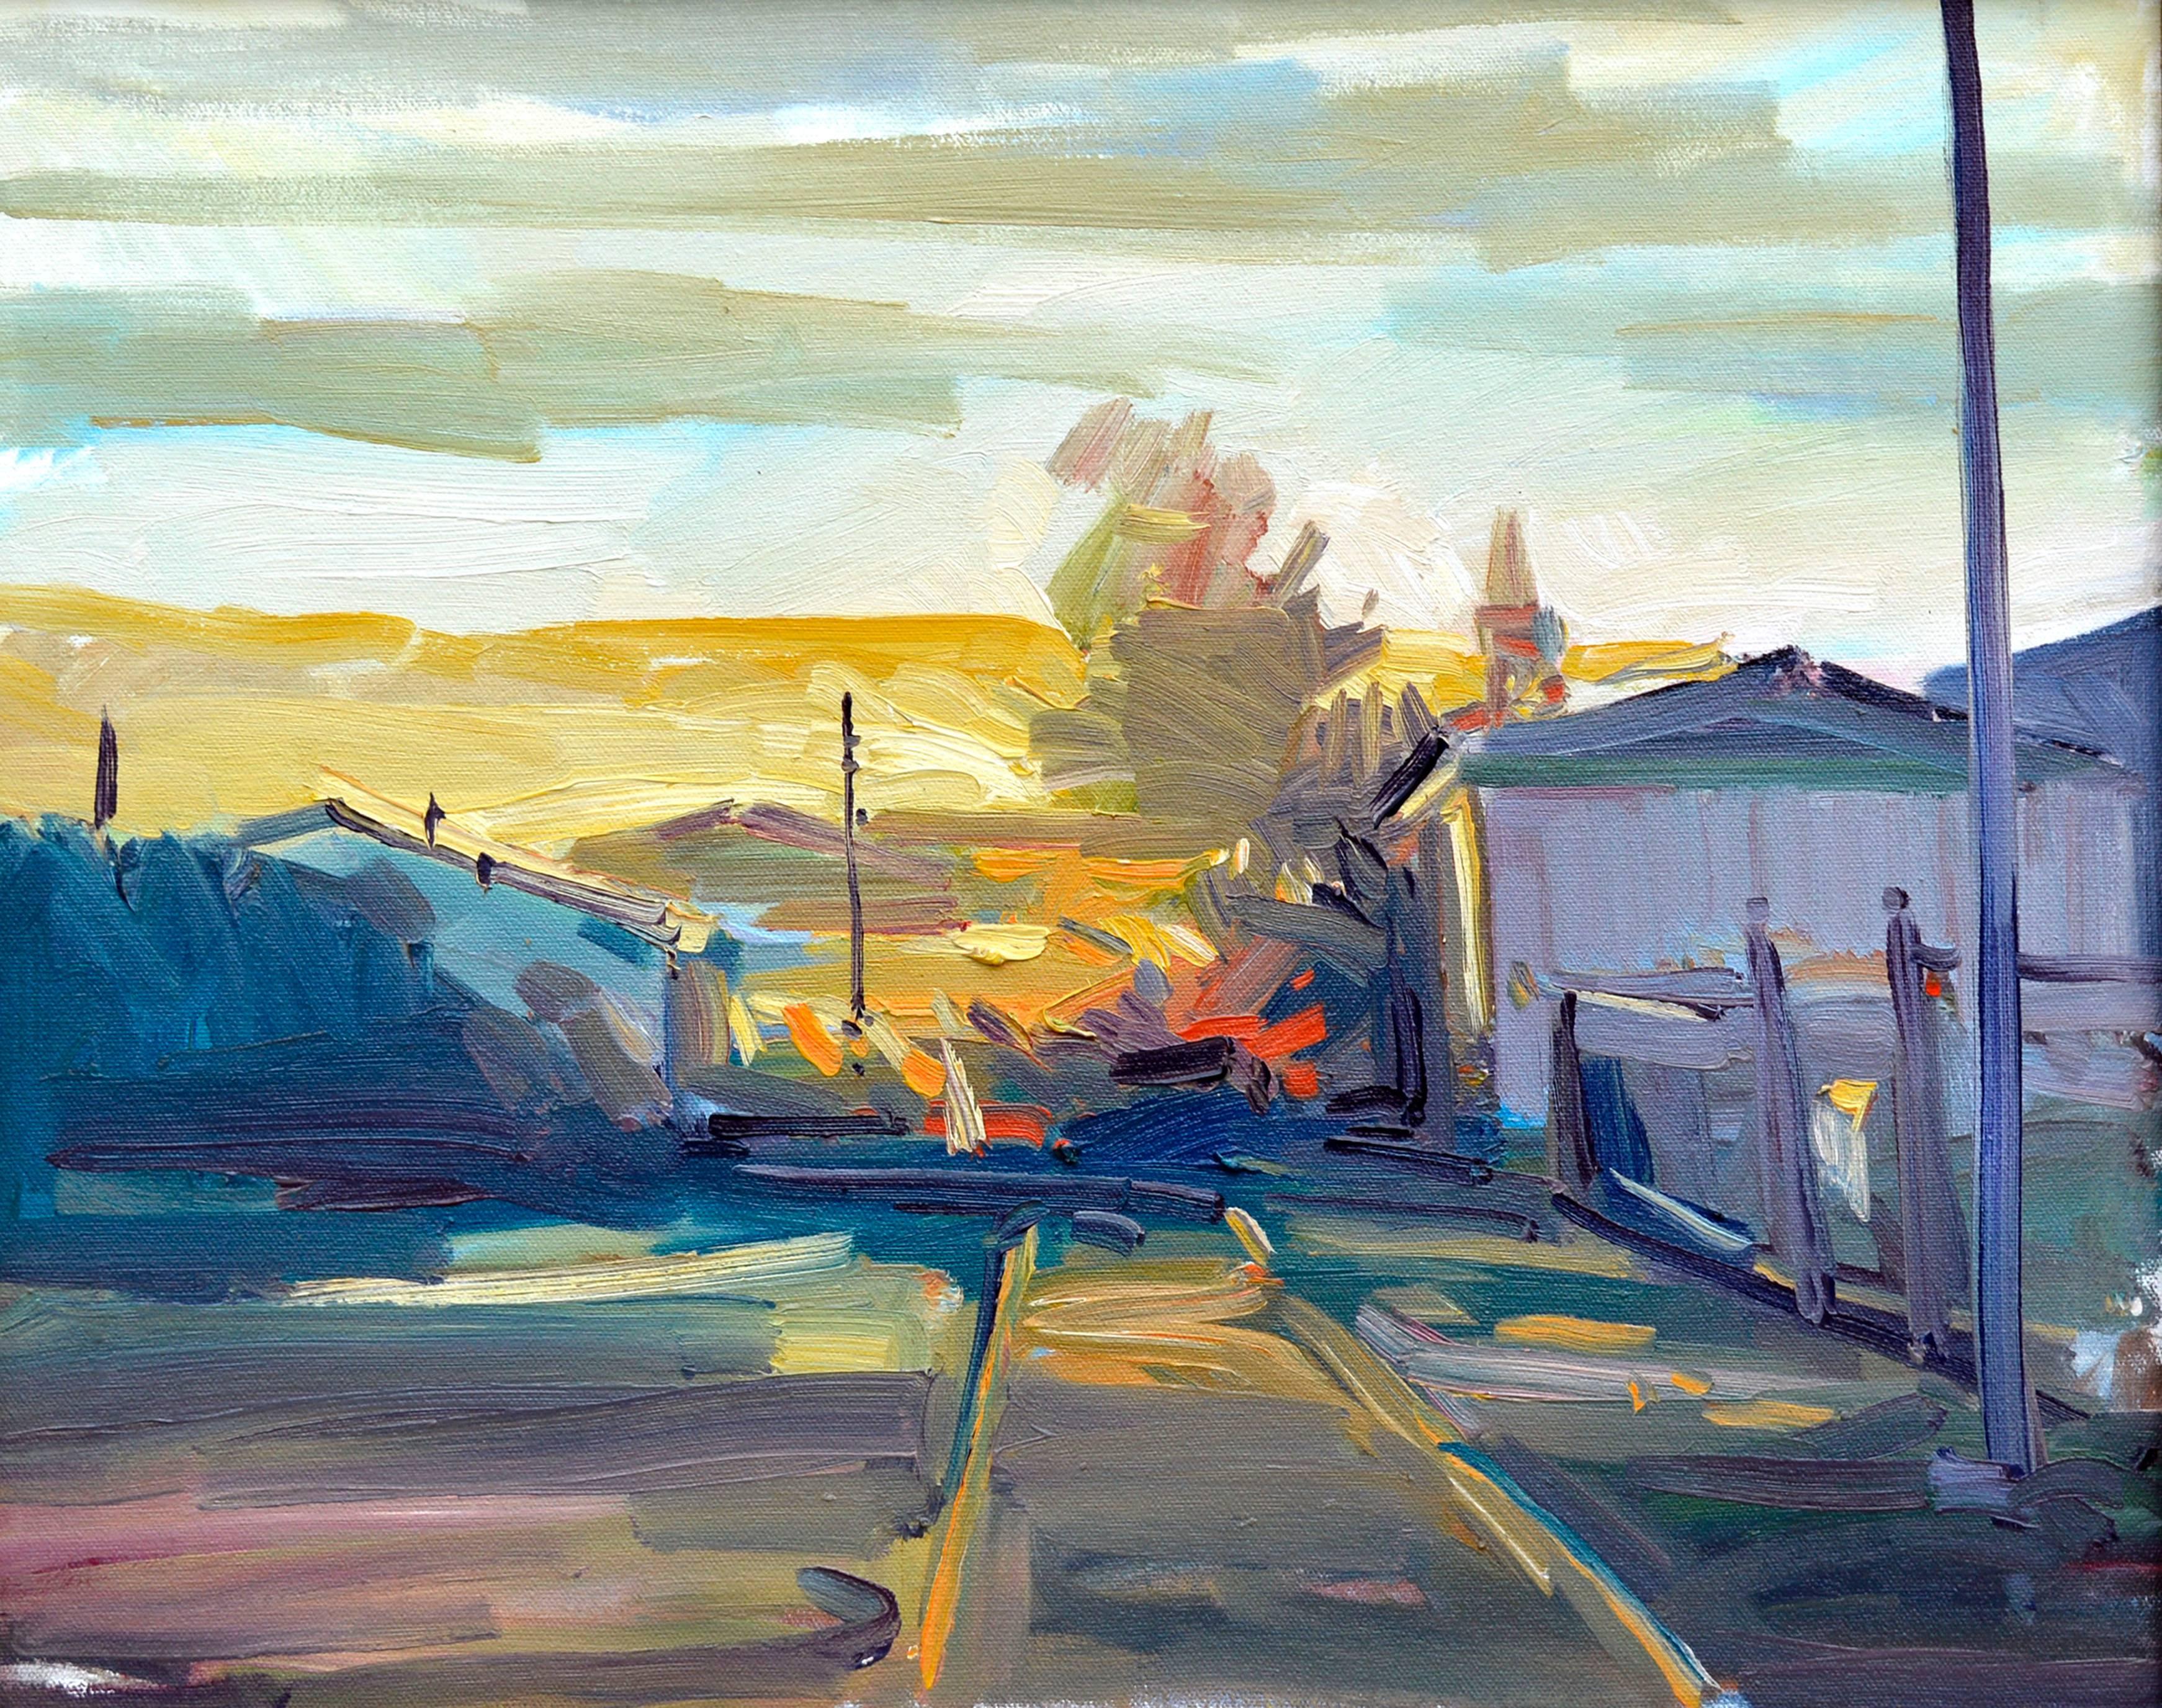 Pacific Grove at Sunset, California Abstracted Landscape  - Painting by Unknown